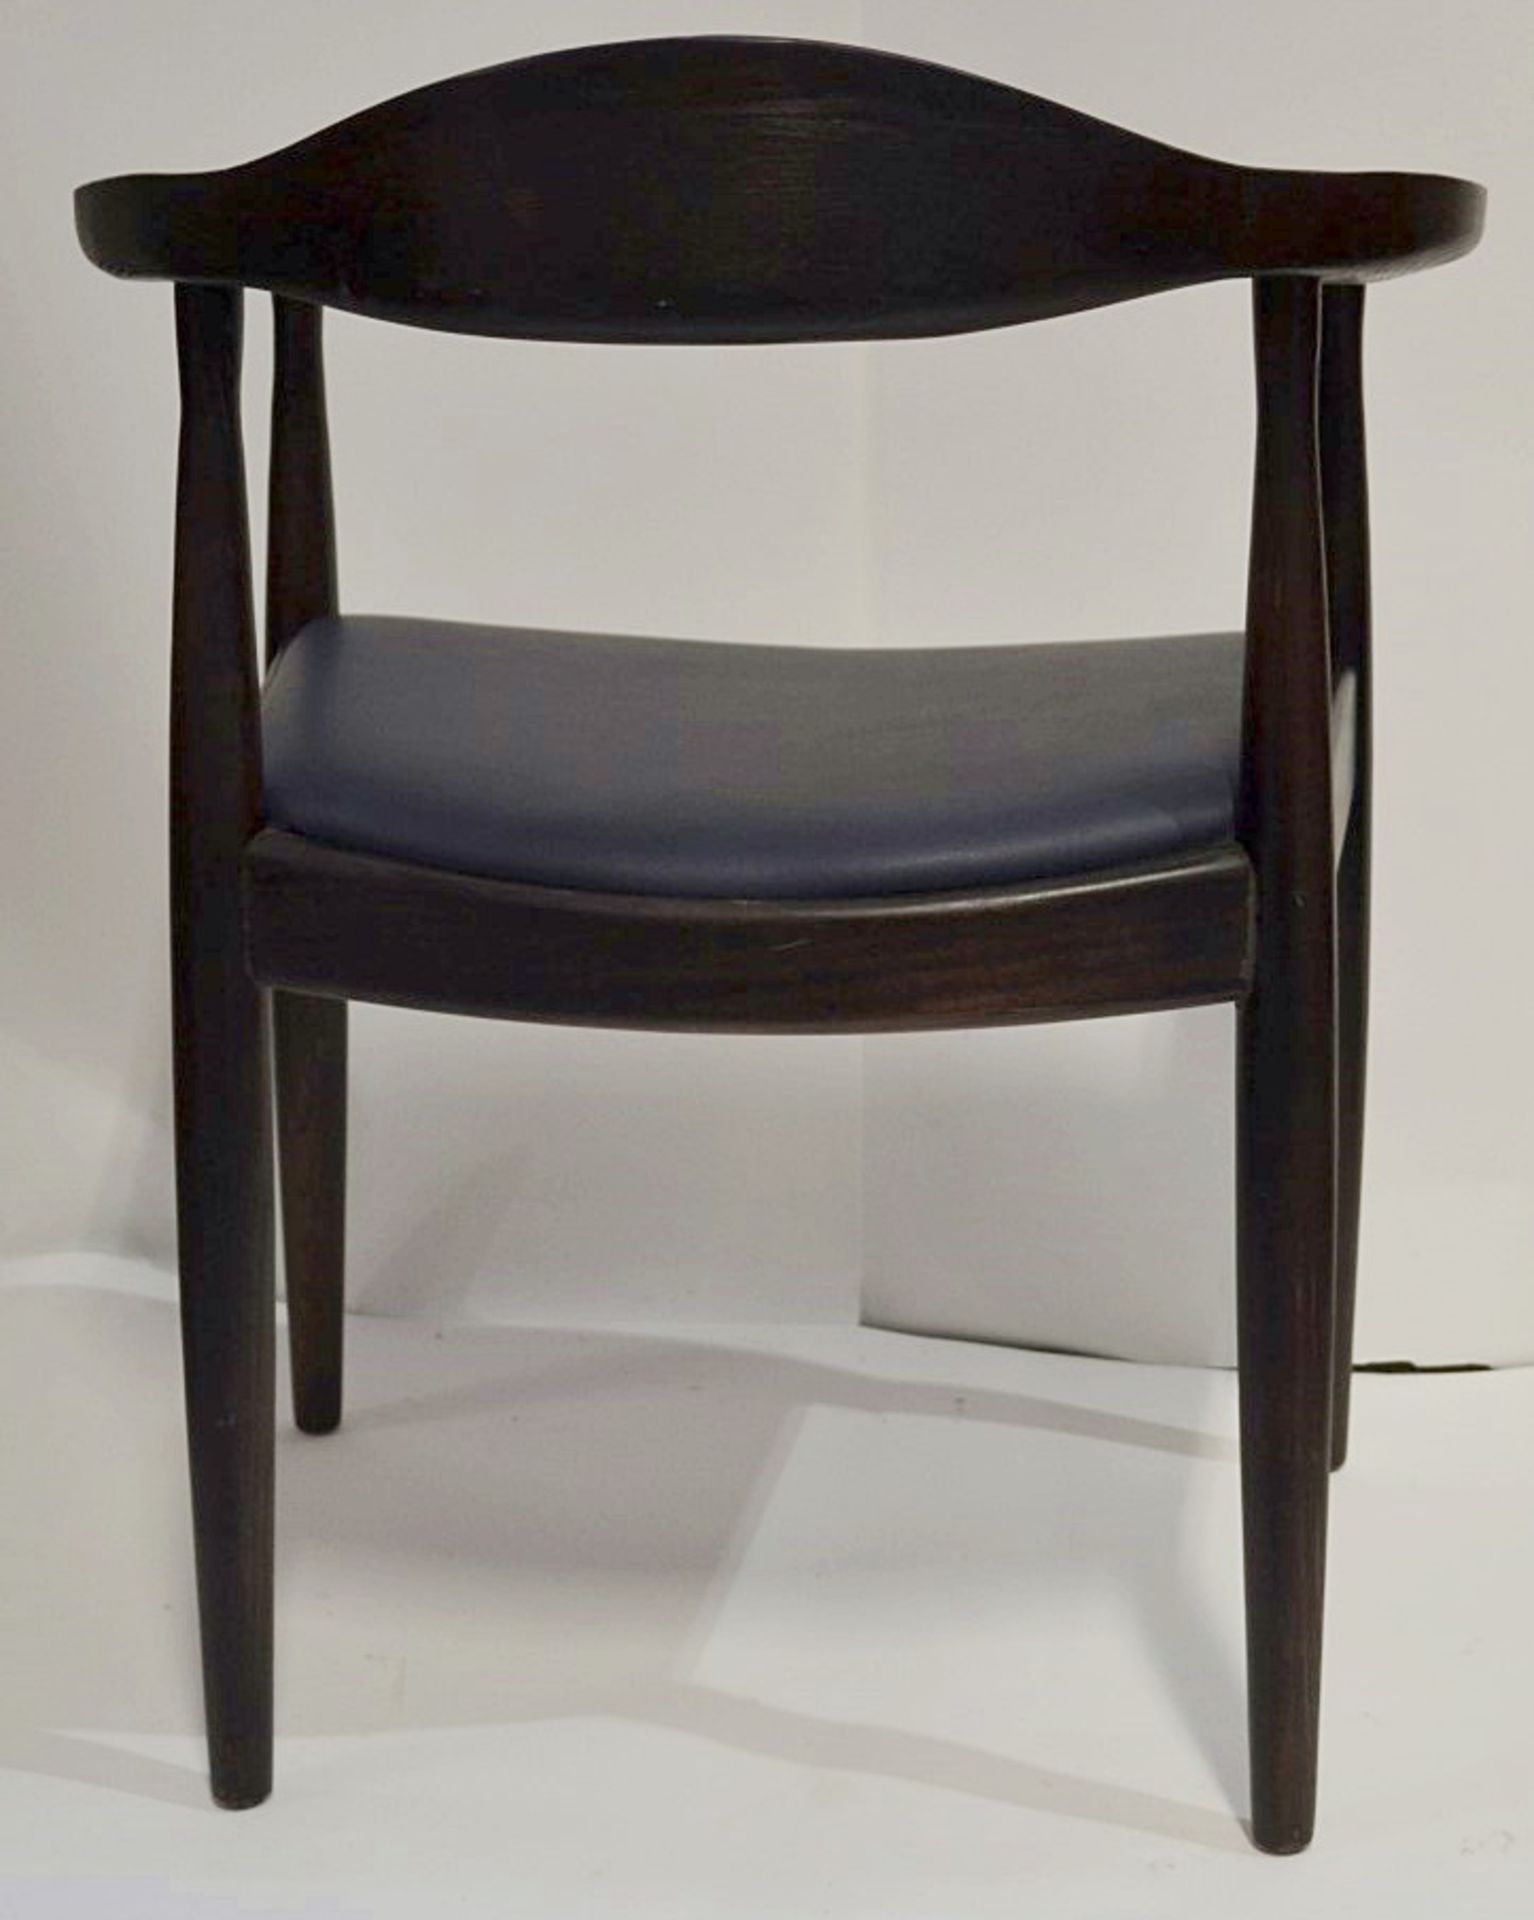 4 x Wooden Restaurant Dining Chairs - Ash Wood Dining Chairs With Dark Finish and Leather - Image 2 of 4